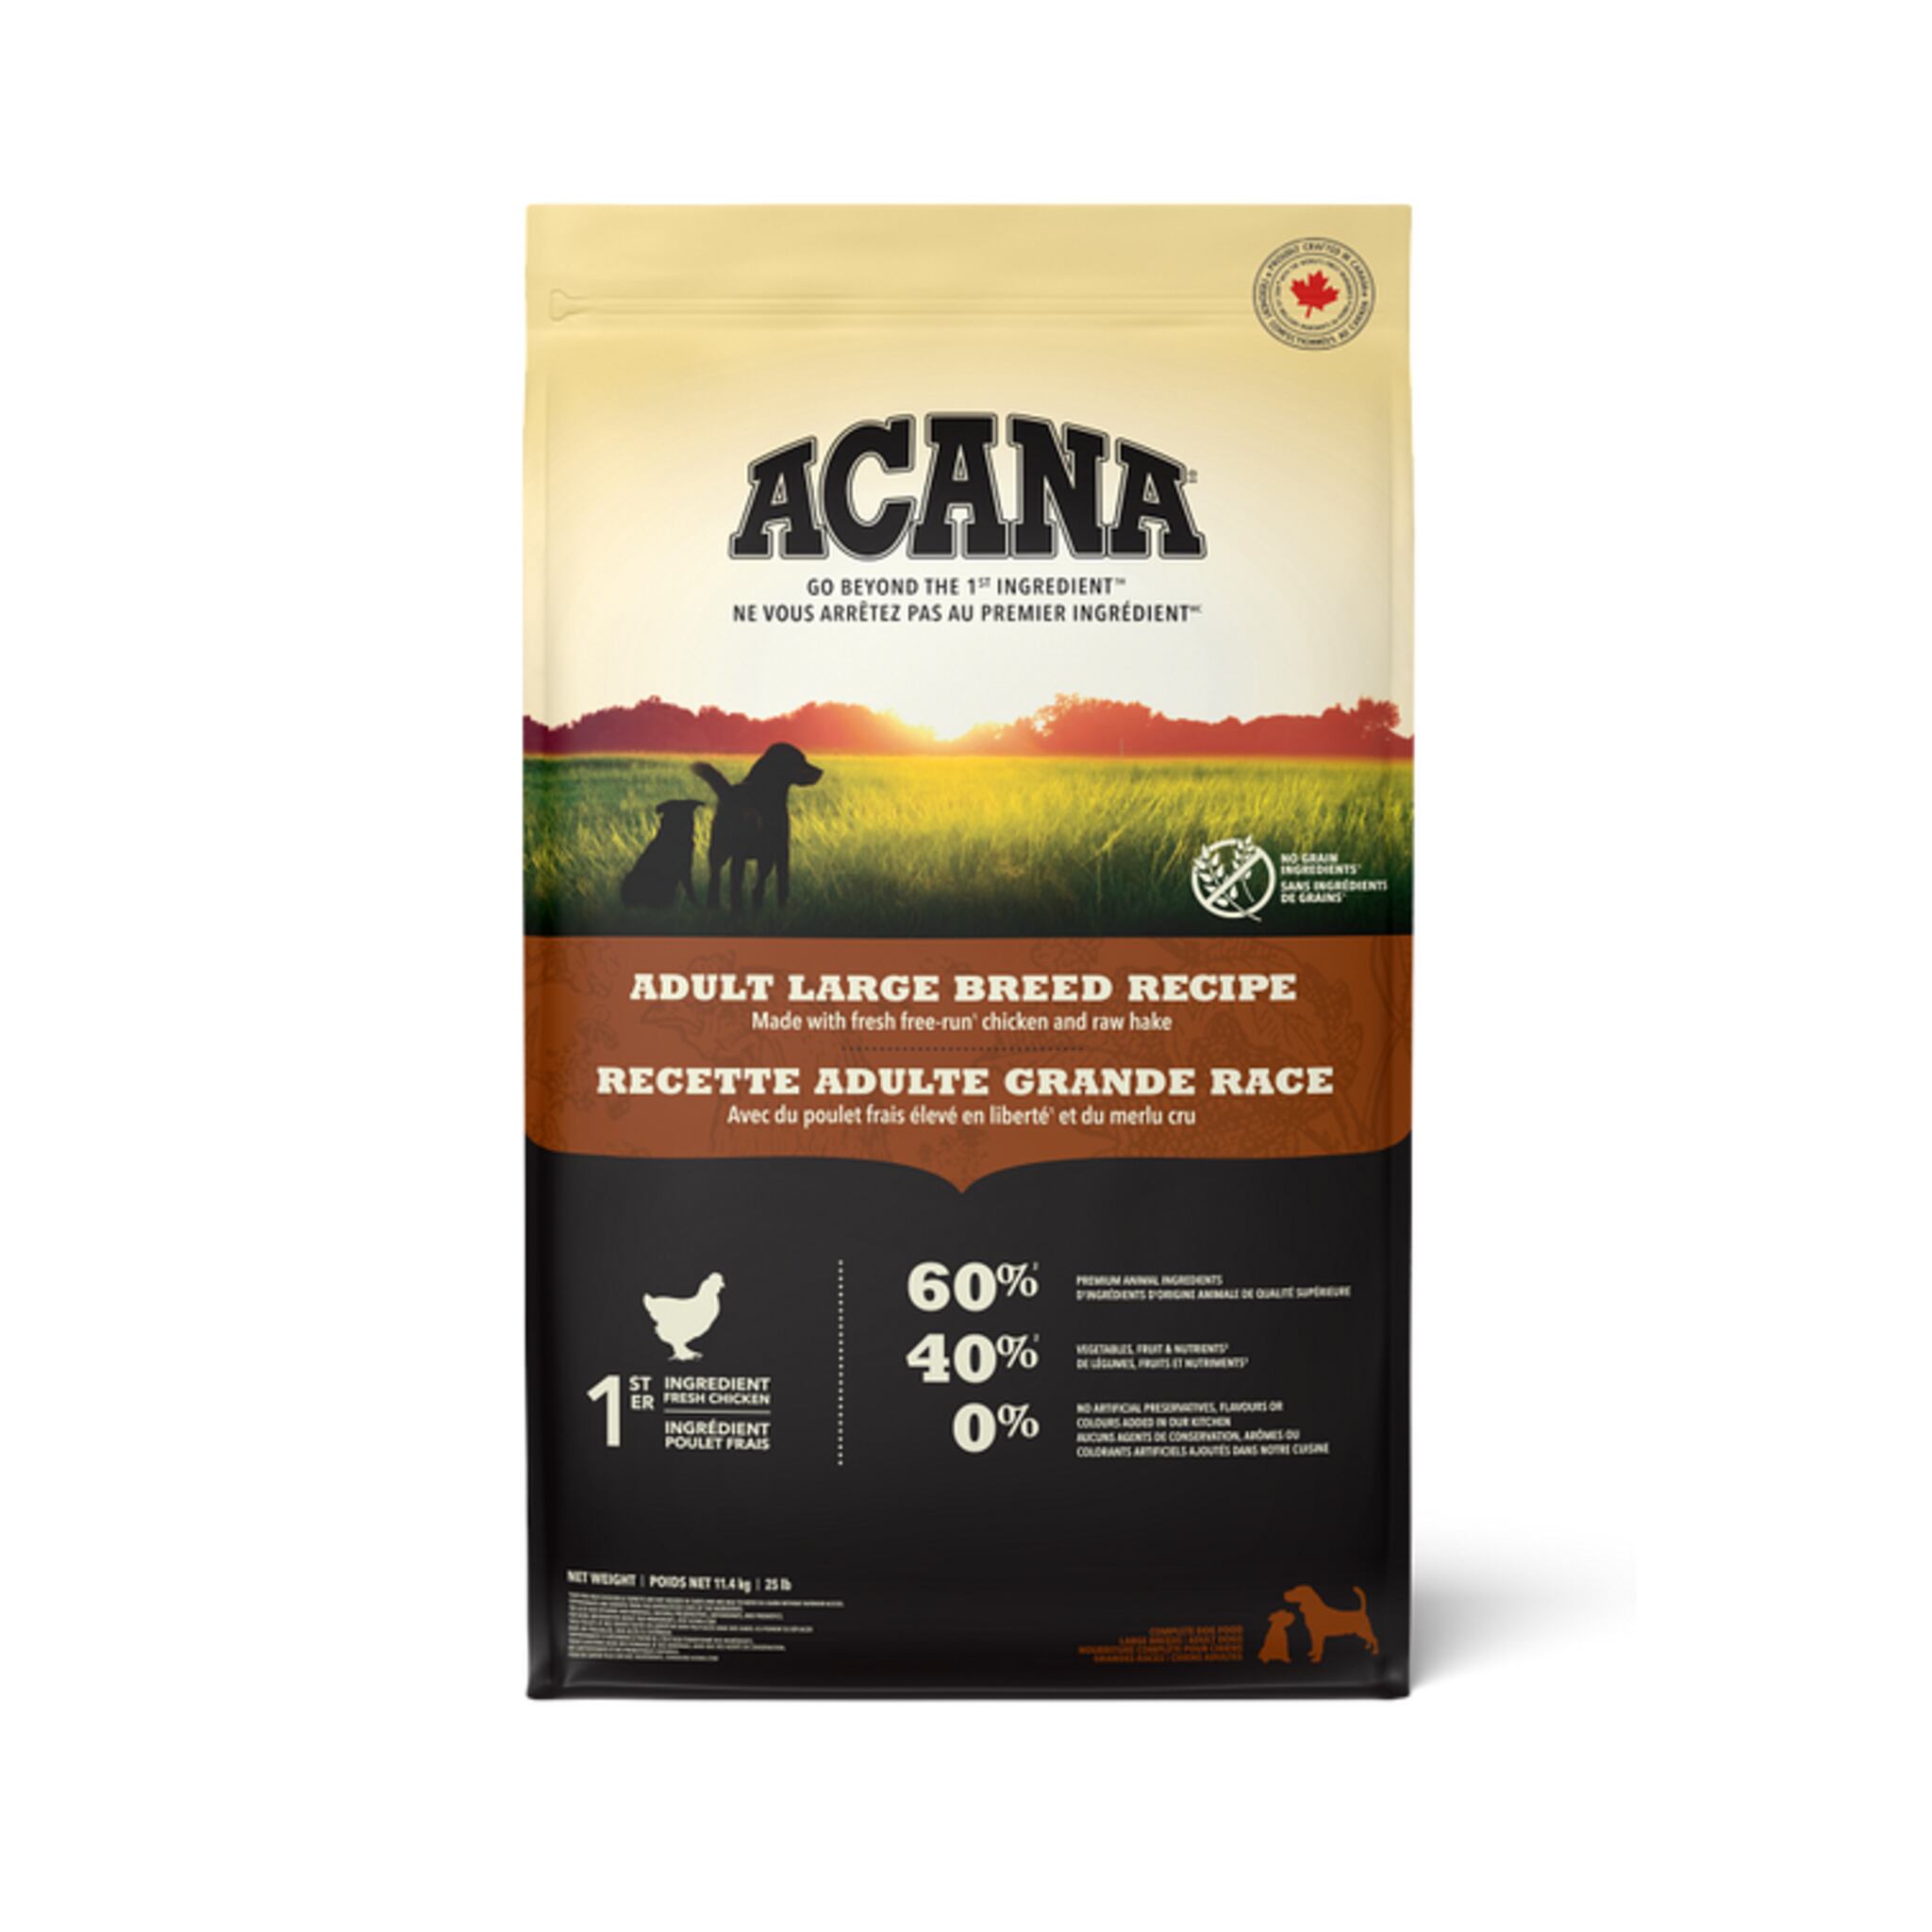 A bag of Acana large breed adult dog food, chicken recipe, 25 lb.